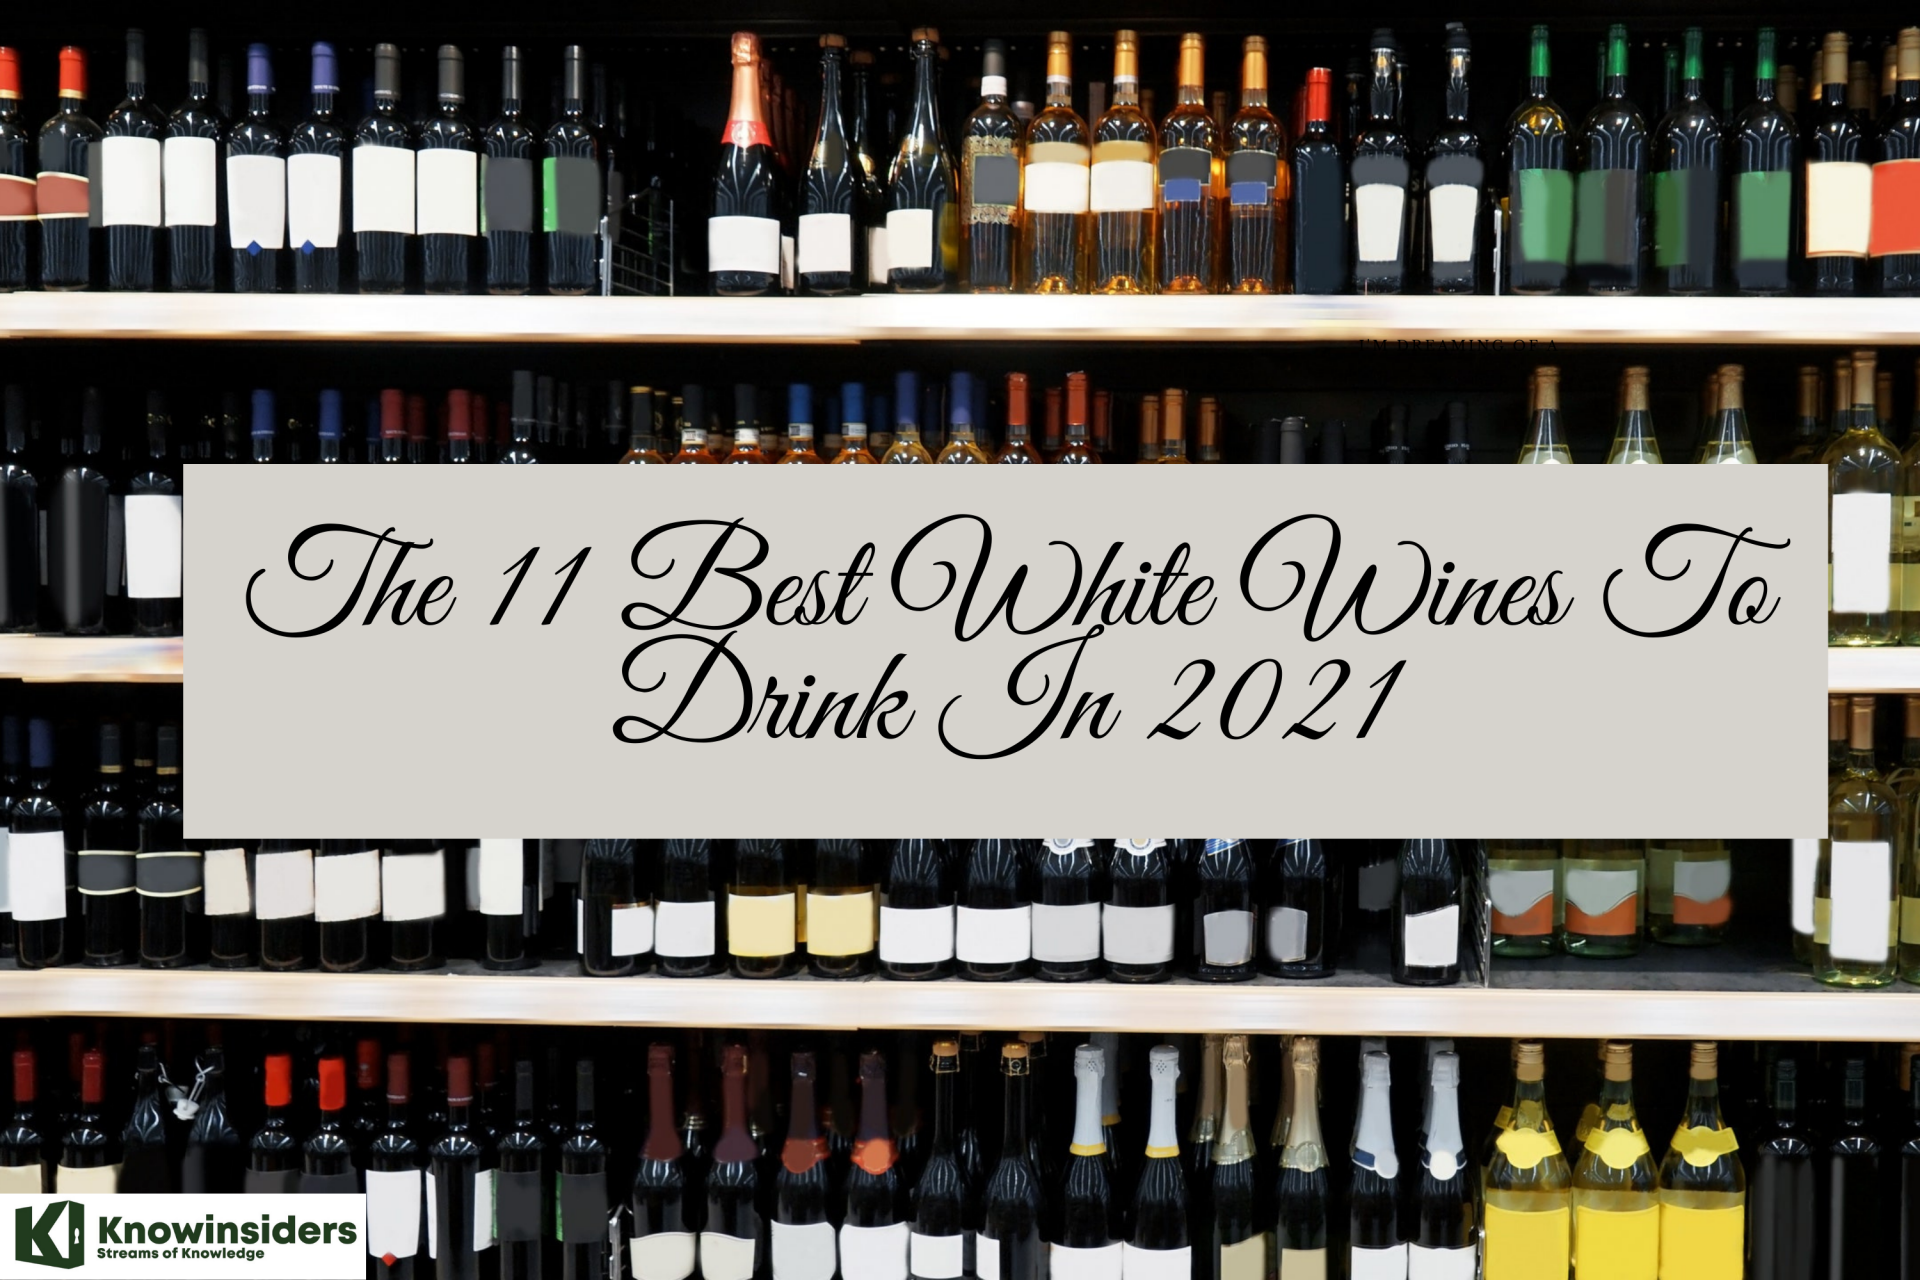 2112 The 11 Best White Wines To Drink In 2021 ?rt=20210509152116?randTime=1628021778